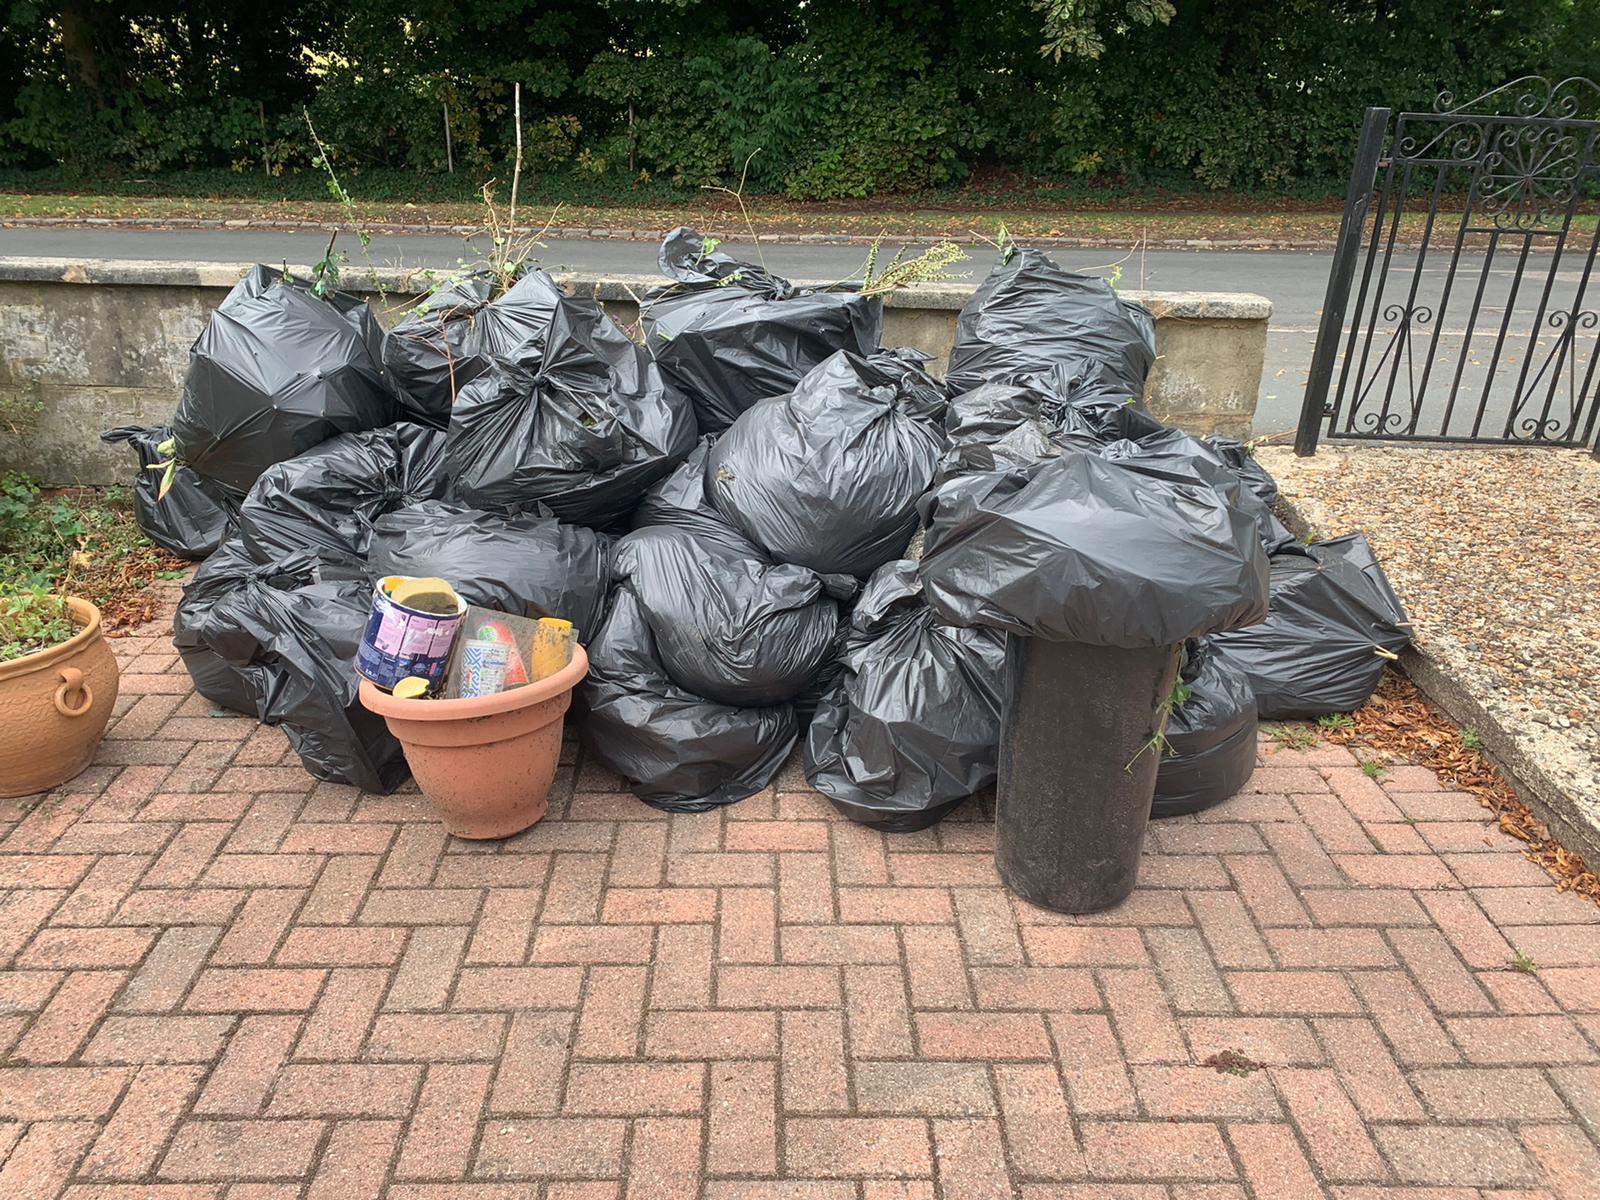 General waste collection wimbledon